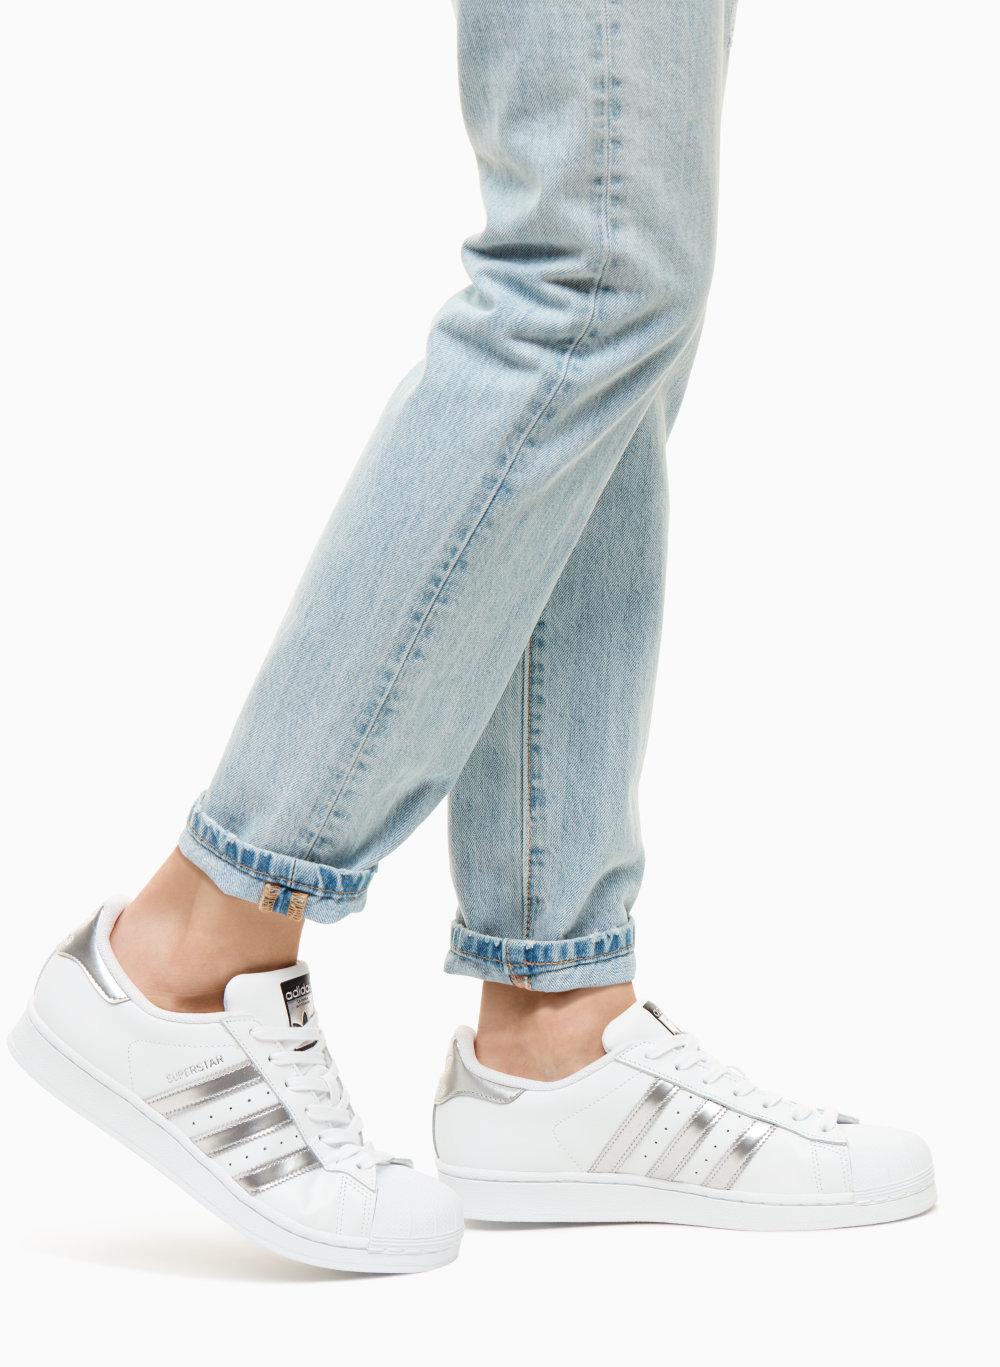 Cheap Adidas Originals Superstar Women's Casual Shoes White/Tactile 